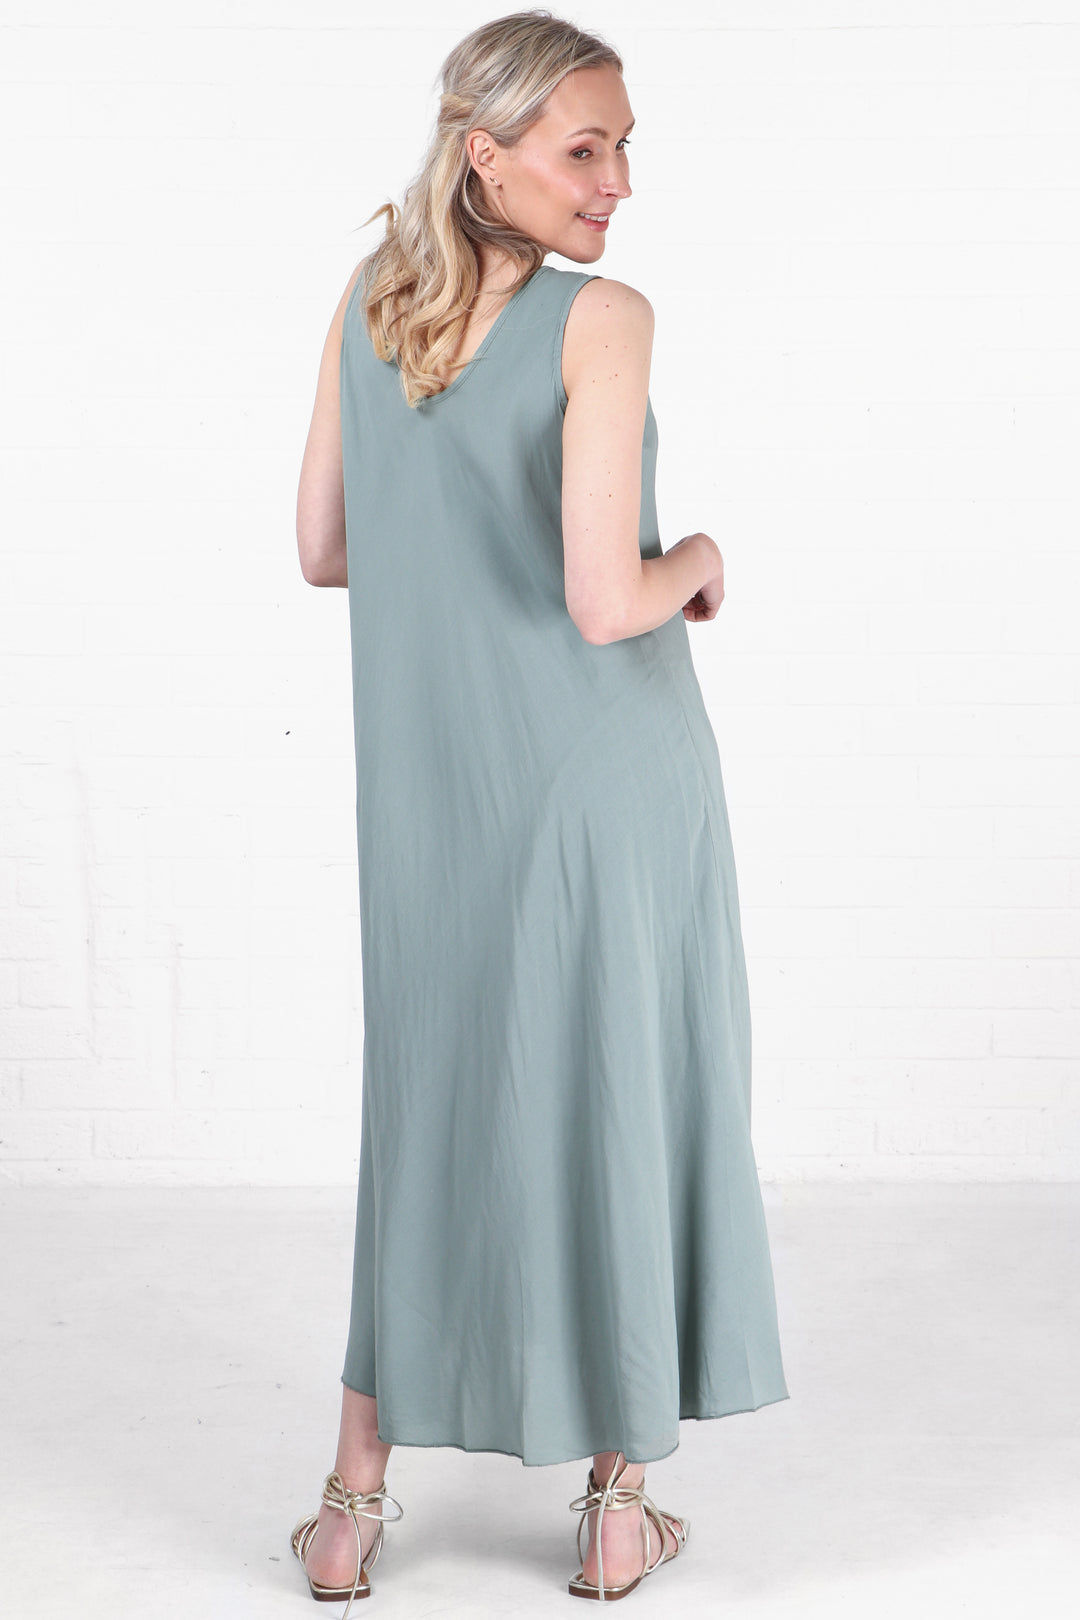 model showing the back of the dress which is the same solid sage green colour as the front, v neck on the back as well as the front